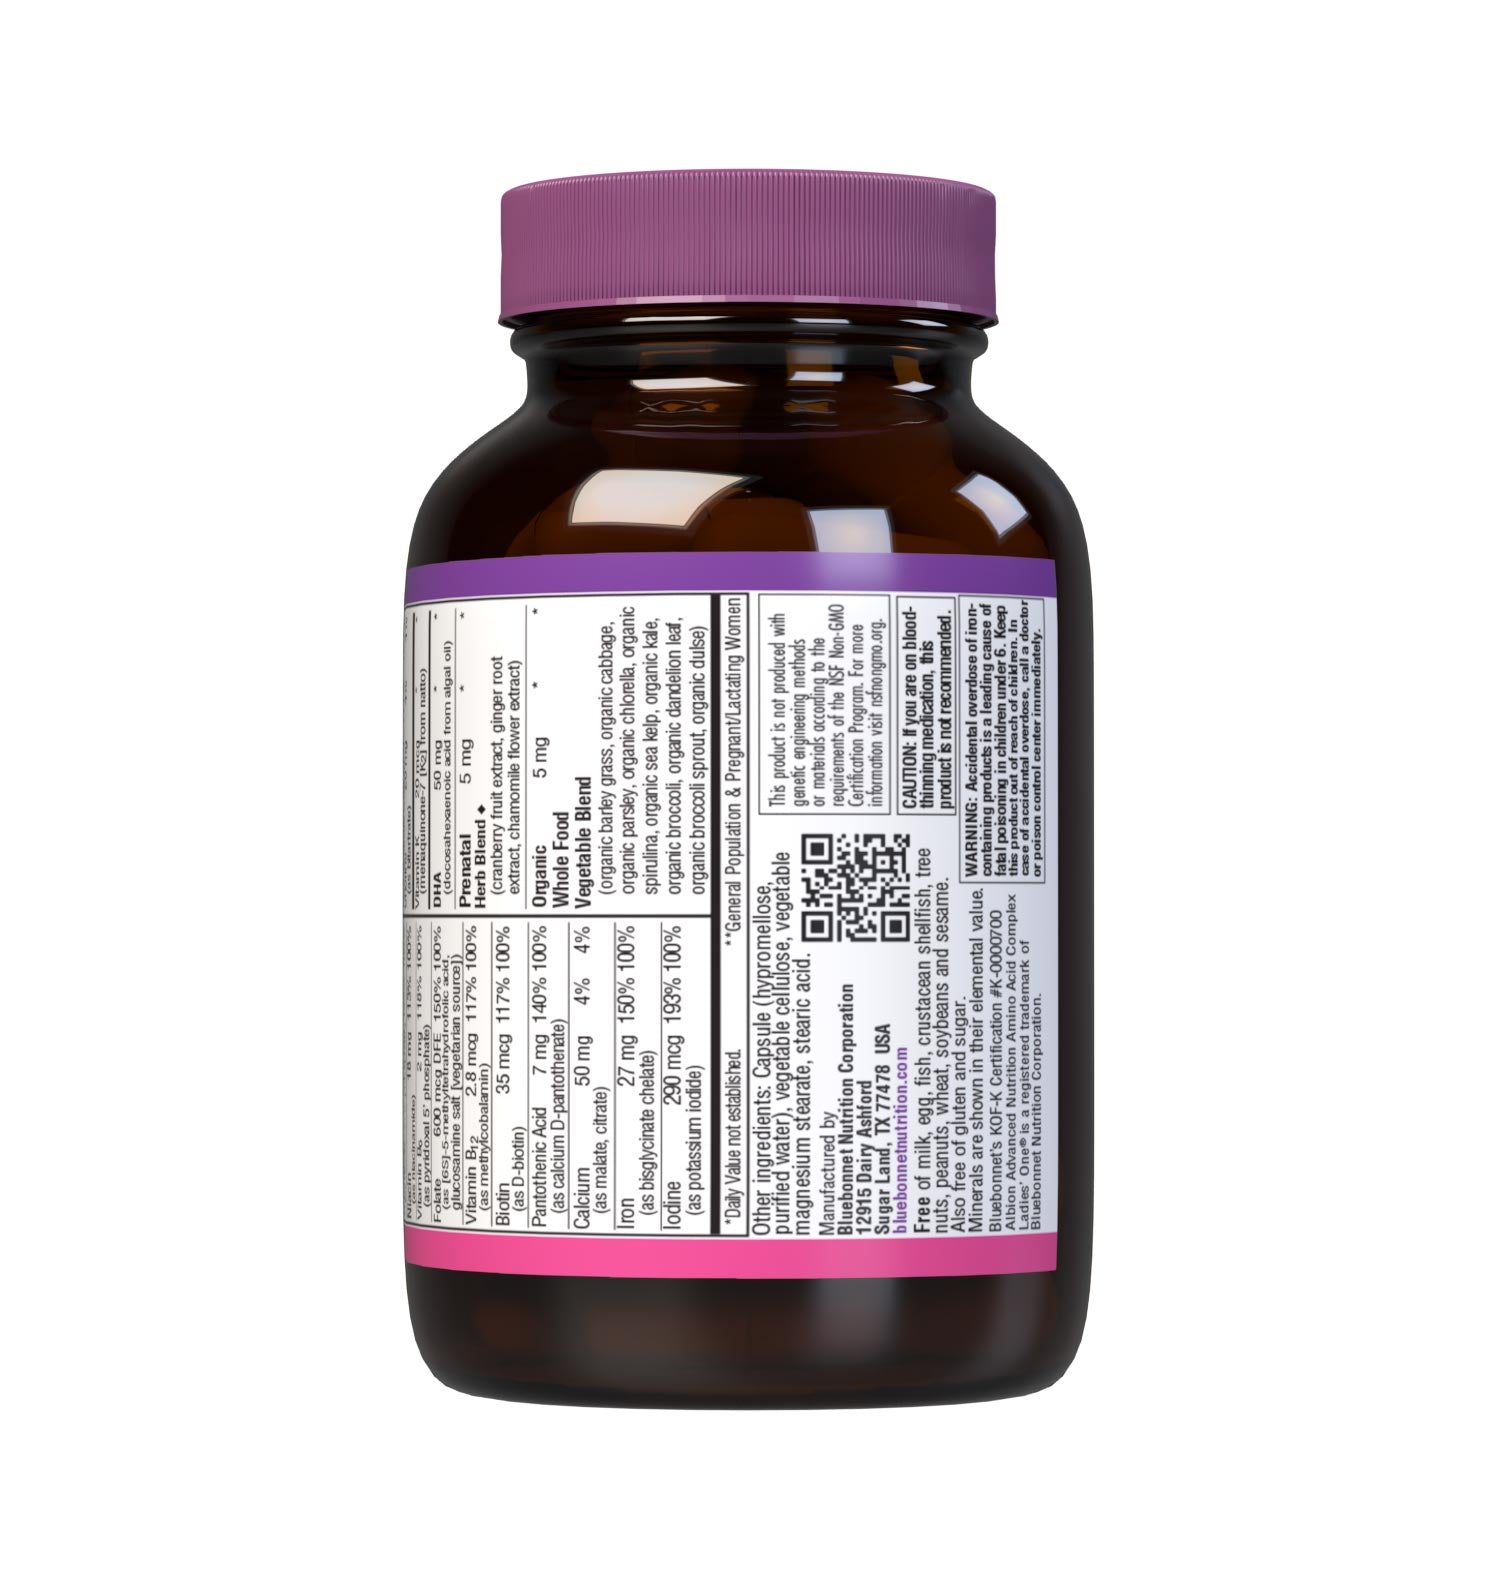 Bluebonnet’s Ladies’ ONE Prenatal Whole Food-Based Multiple 30 vegetable capsules provides daily nutritional support for women trying to conceive, pregnant or nursing in just one convenient capsule per serving. Delivers targeted nutrients for conception and fertility support, healthy pregnancy, proper baby growth and development, and lactation boost. Supplement facts panel bottom part. #size_30 count